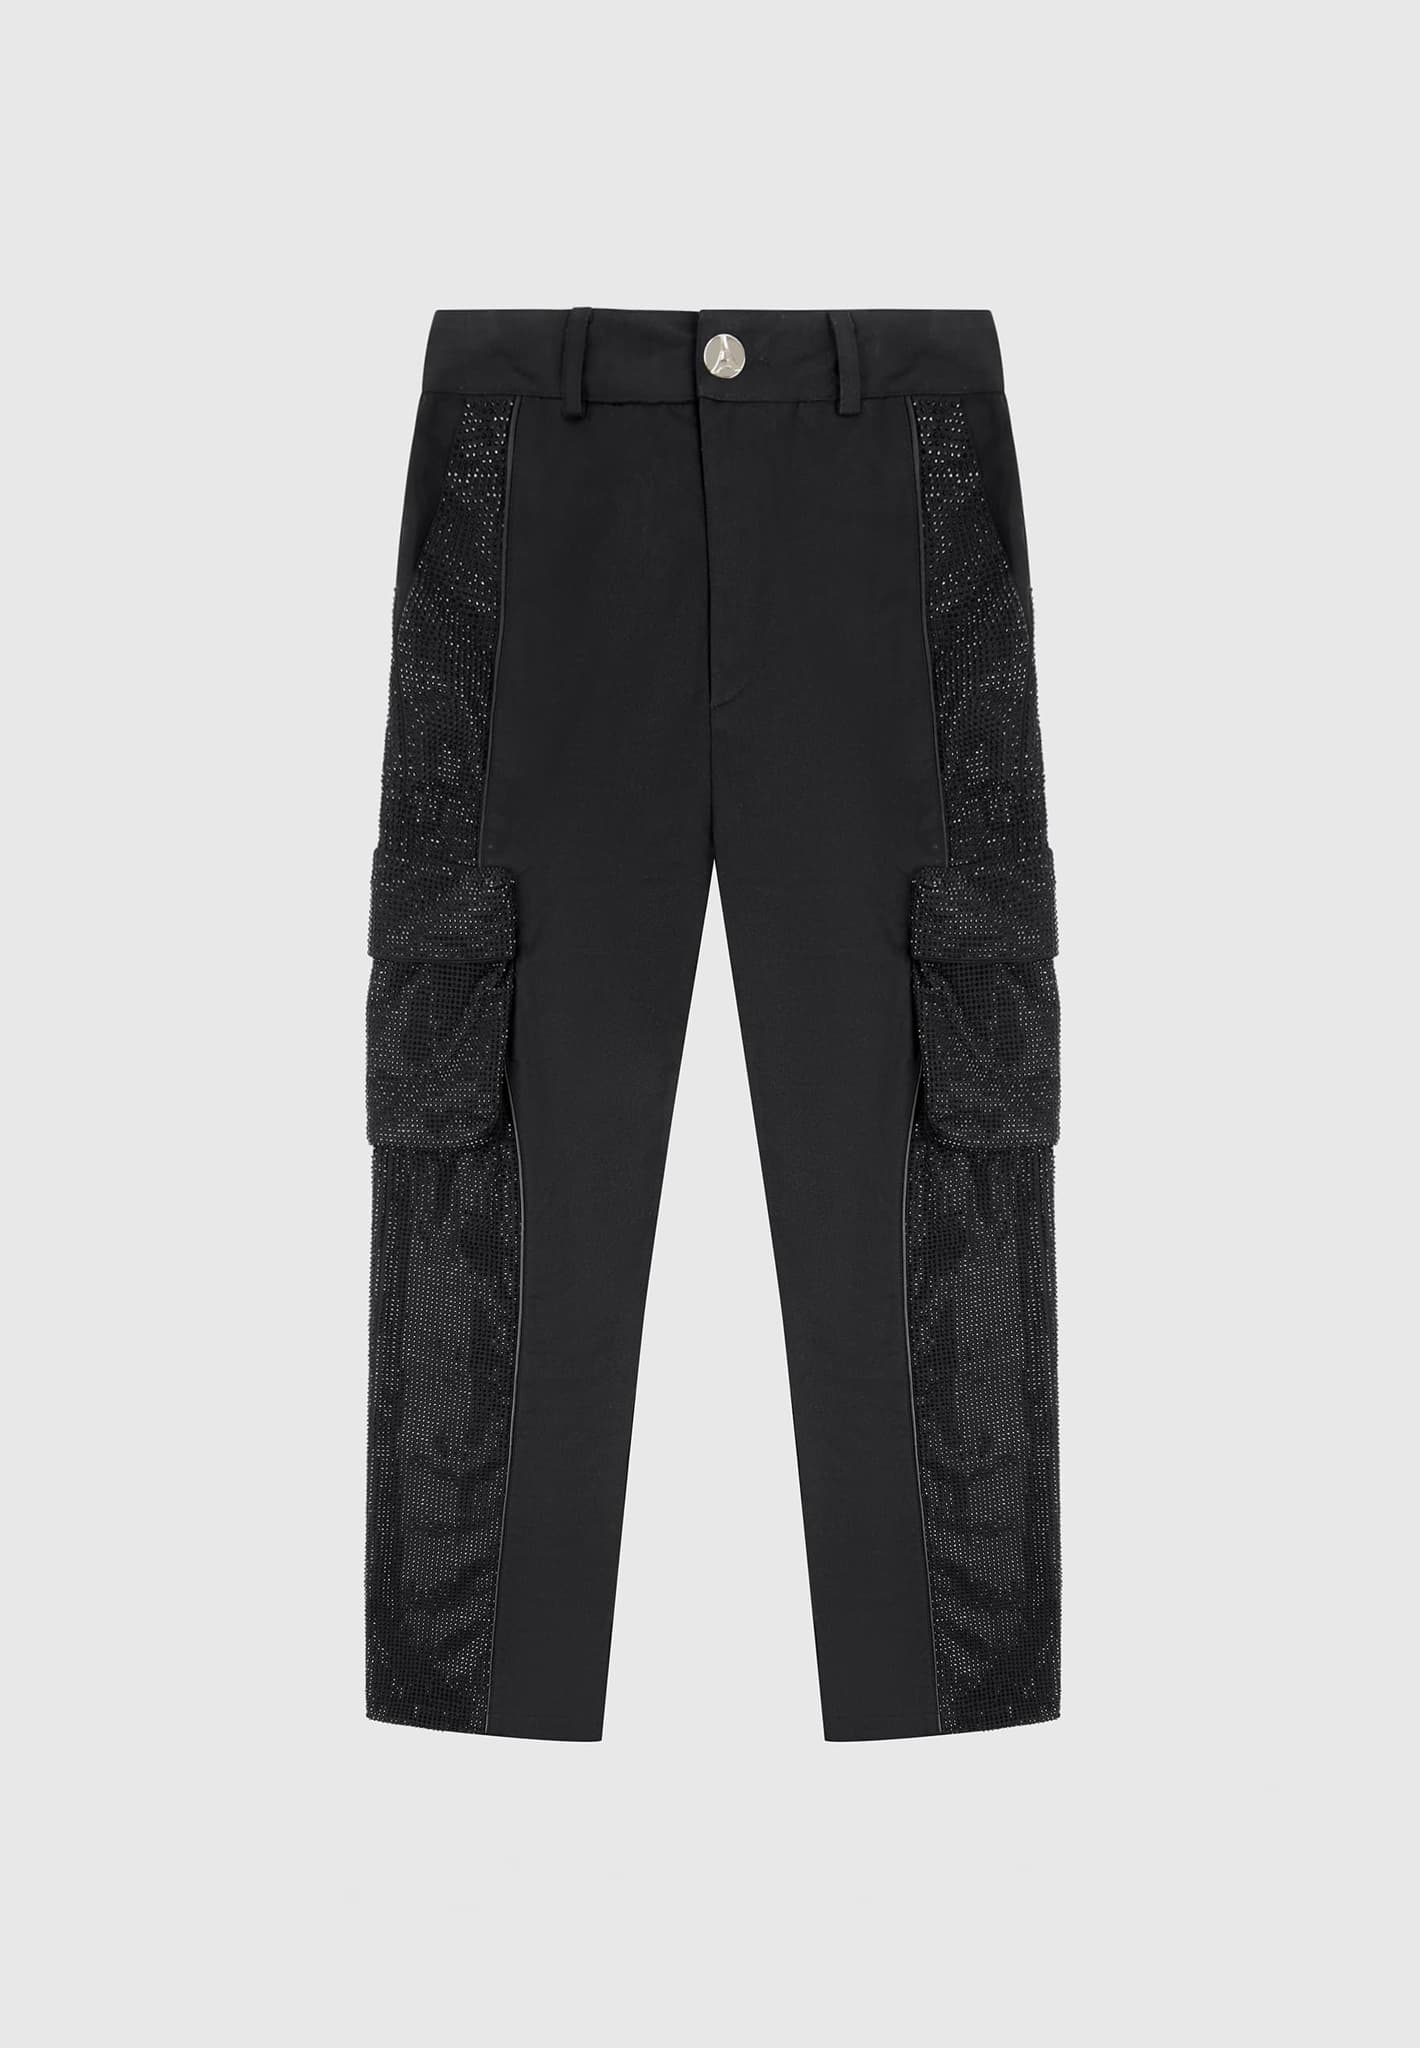 Rta Pinstripe Zip Up Pants In Black And Silver - 24 - Gem